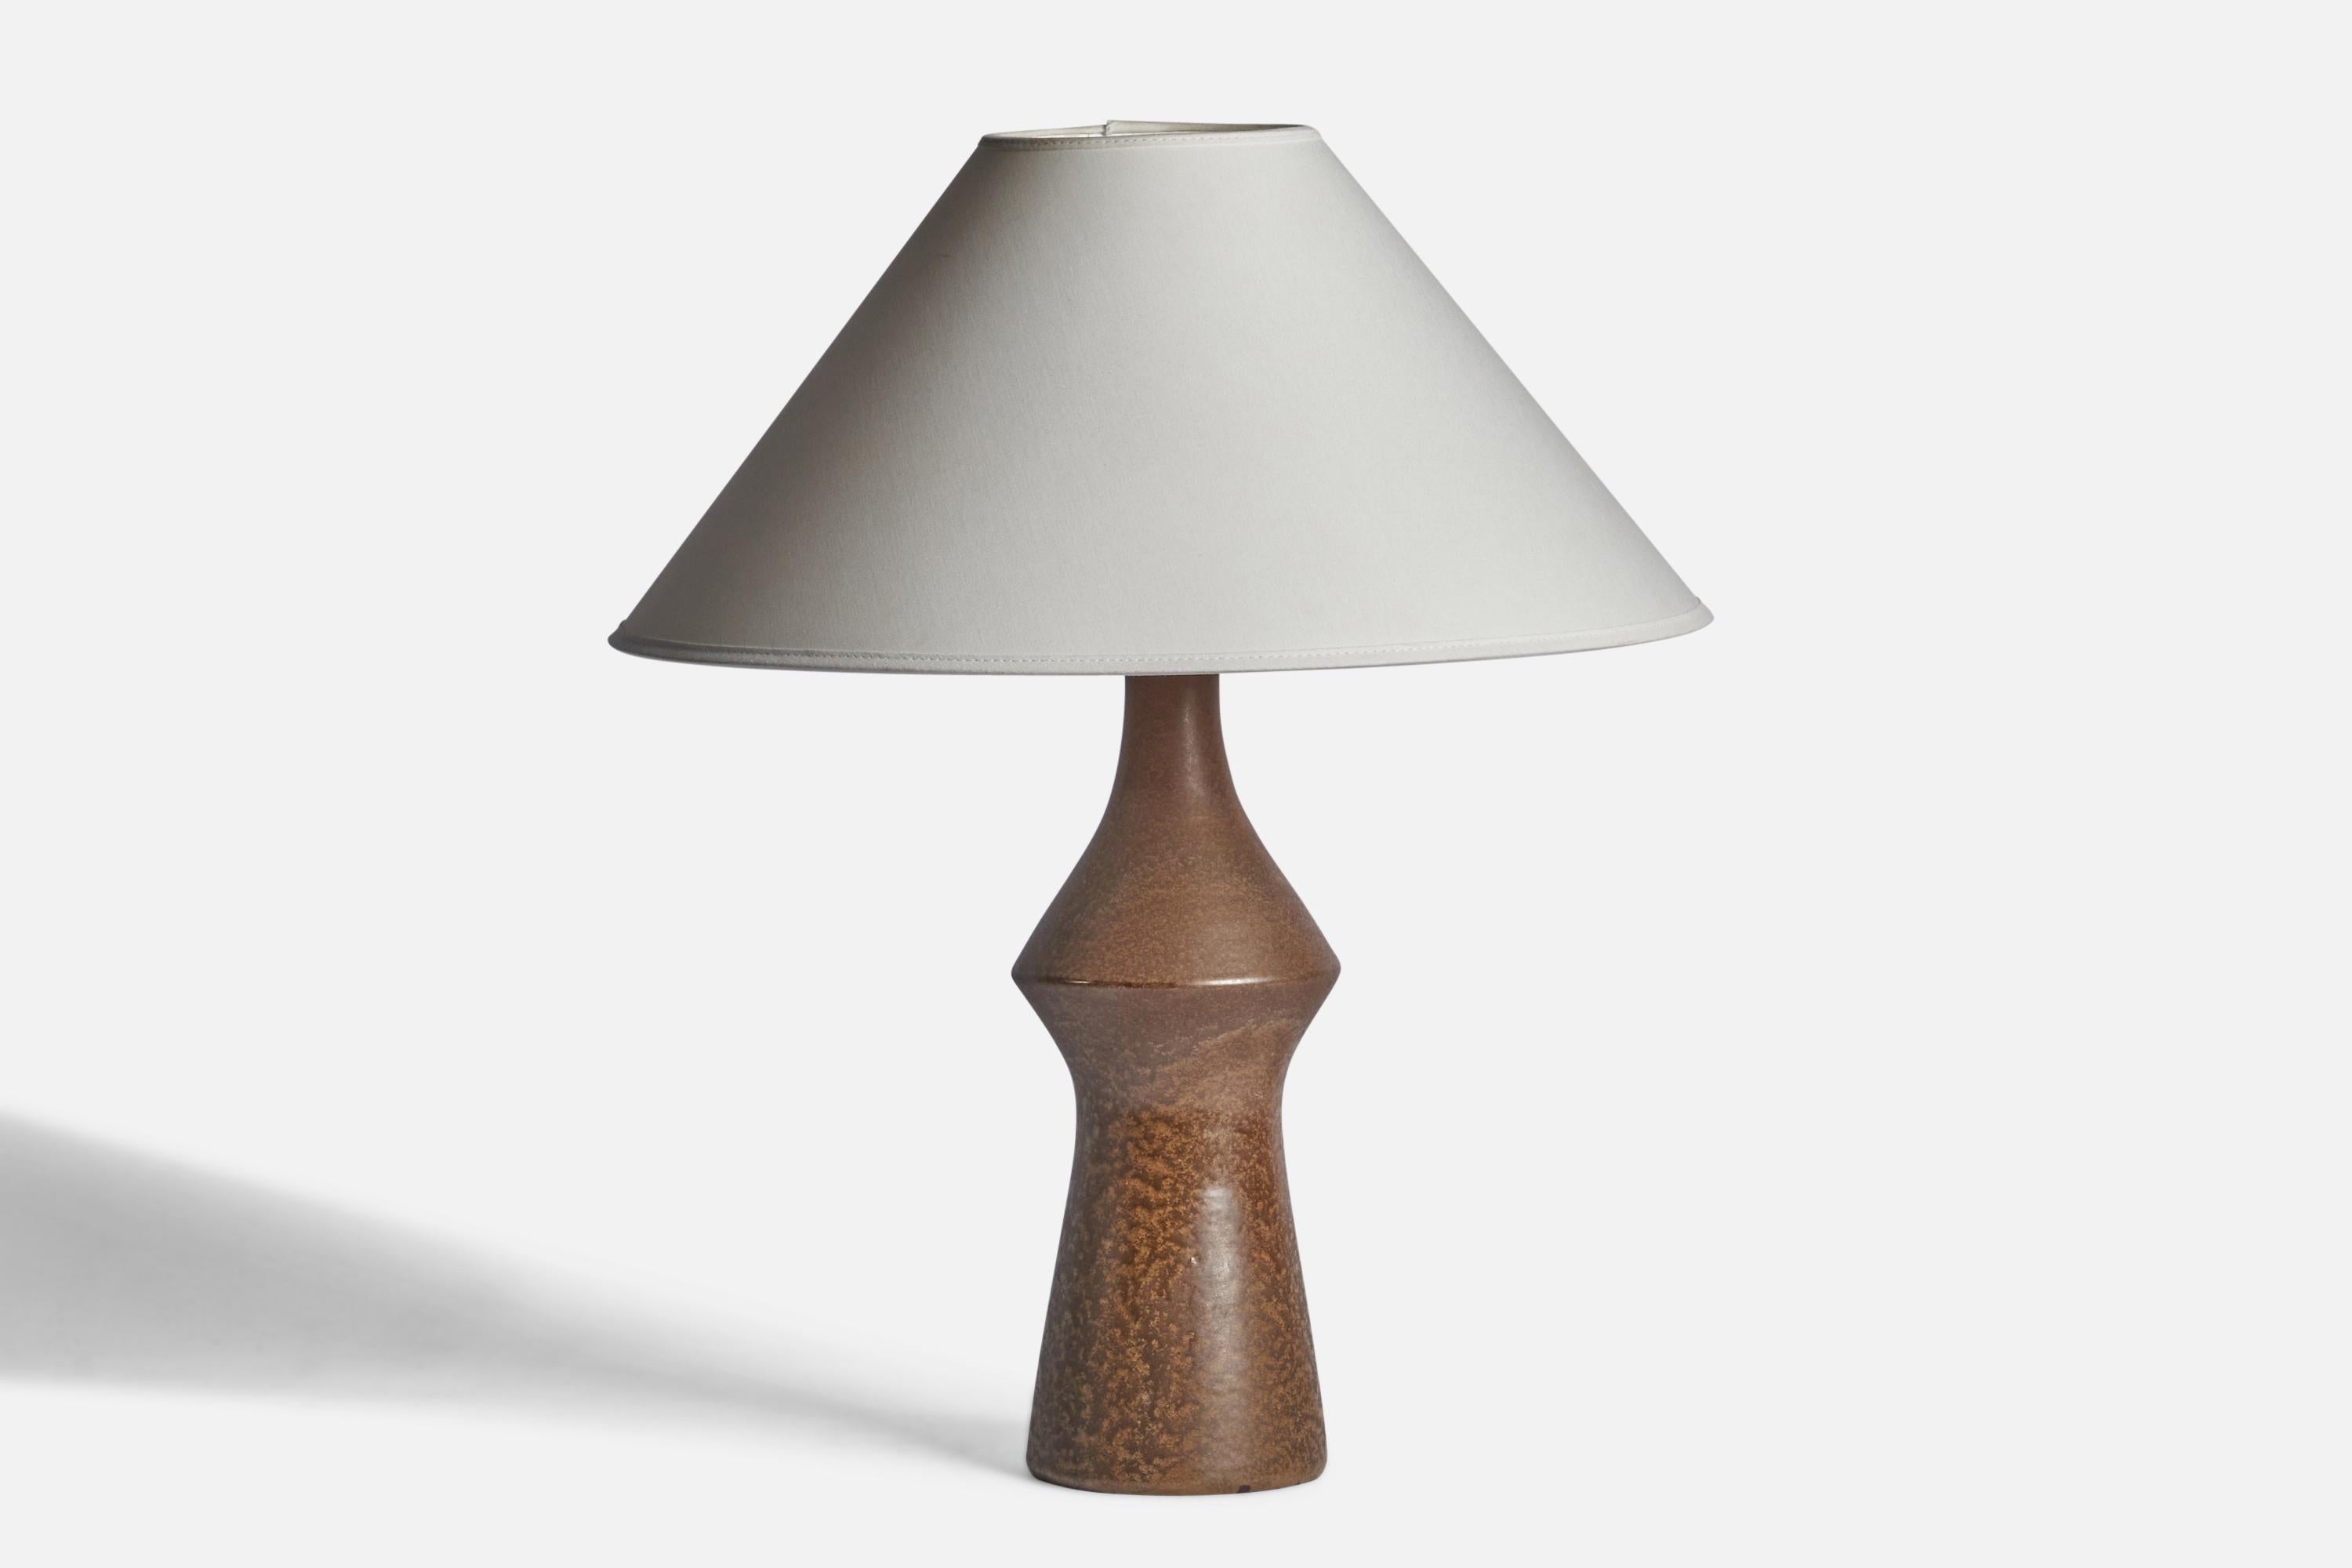 A brown-glazed stoneware table lamp designed and produced in Sweden, 1960s.

Dimensions of Lamp (inches): 15.25” H x 4.75” Diameter
Dimensions of Shade (inches): 4.5” Top Diameter x 16” Bottom Diameter x 7.25” H
Dimensions of Lamp with Shade